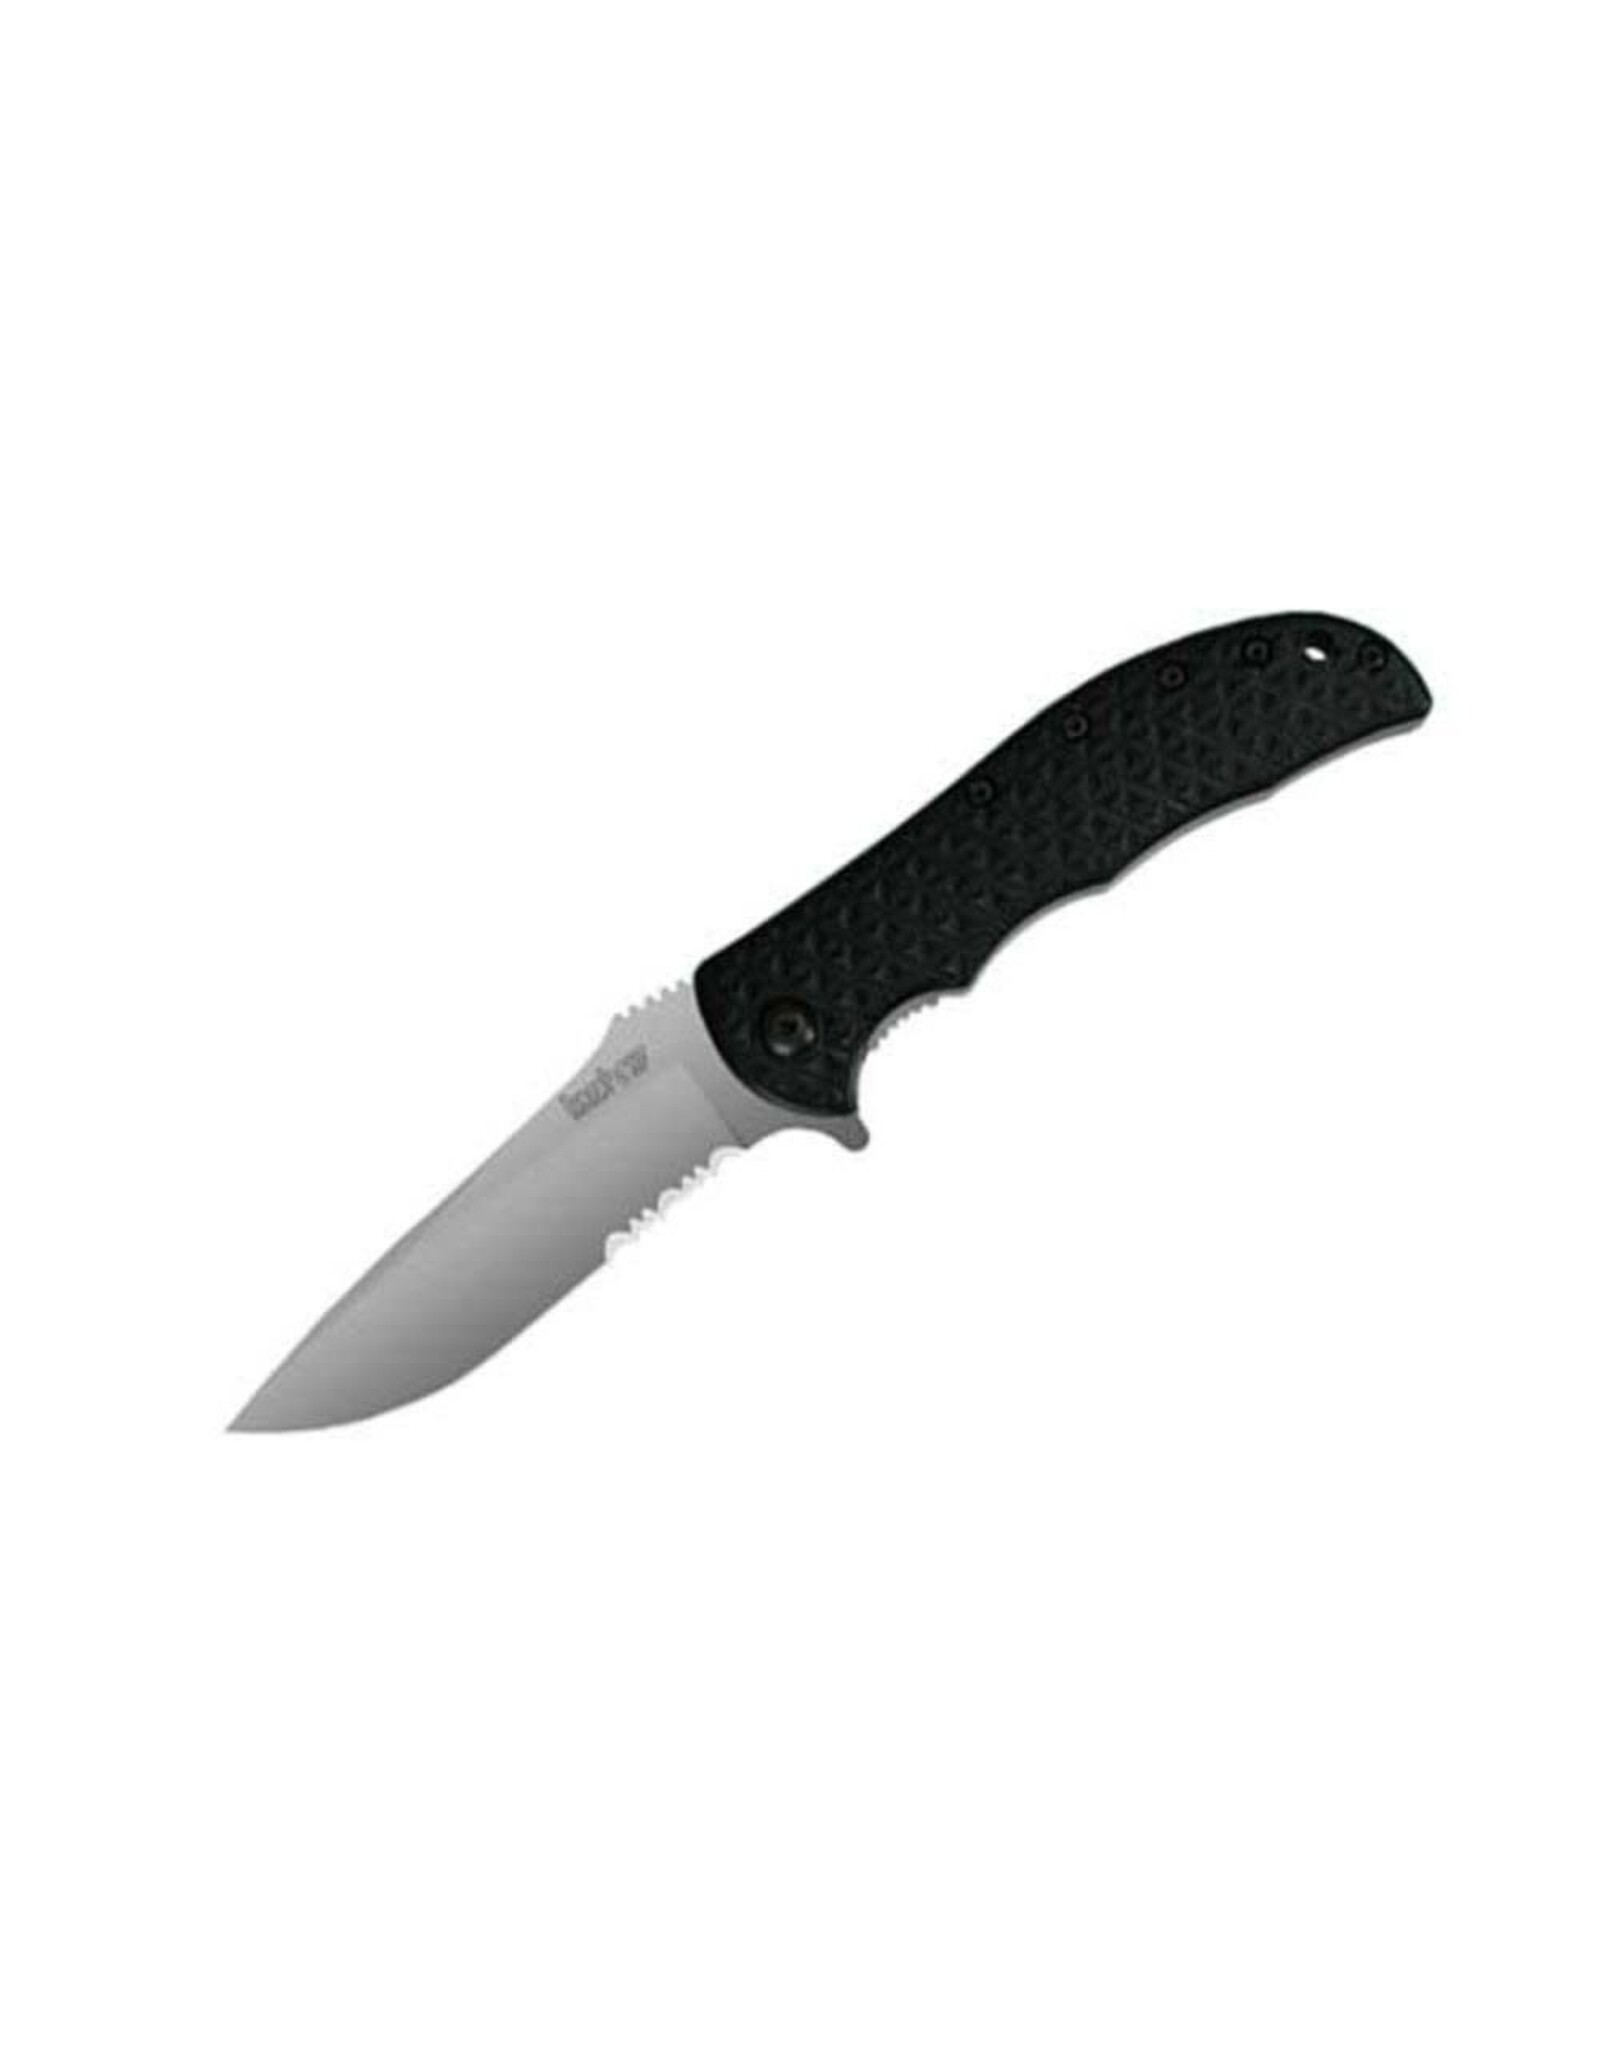 kershaw Kershaw 3650ST Volt II Assisted Opening Folding Knife, 3.25" Blade, Liner Lock Speed Safe, Serrated